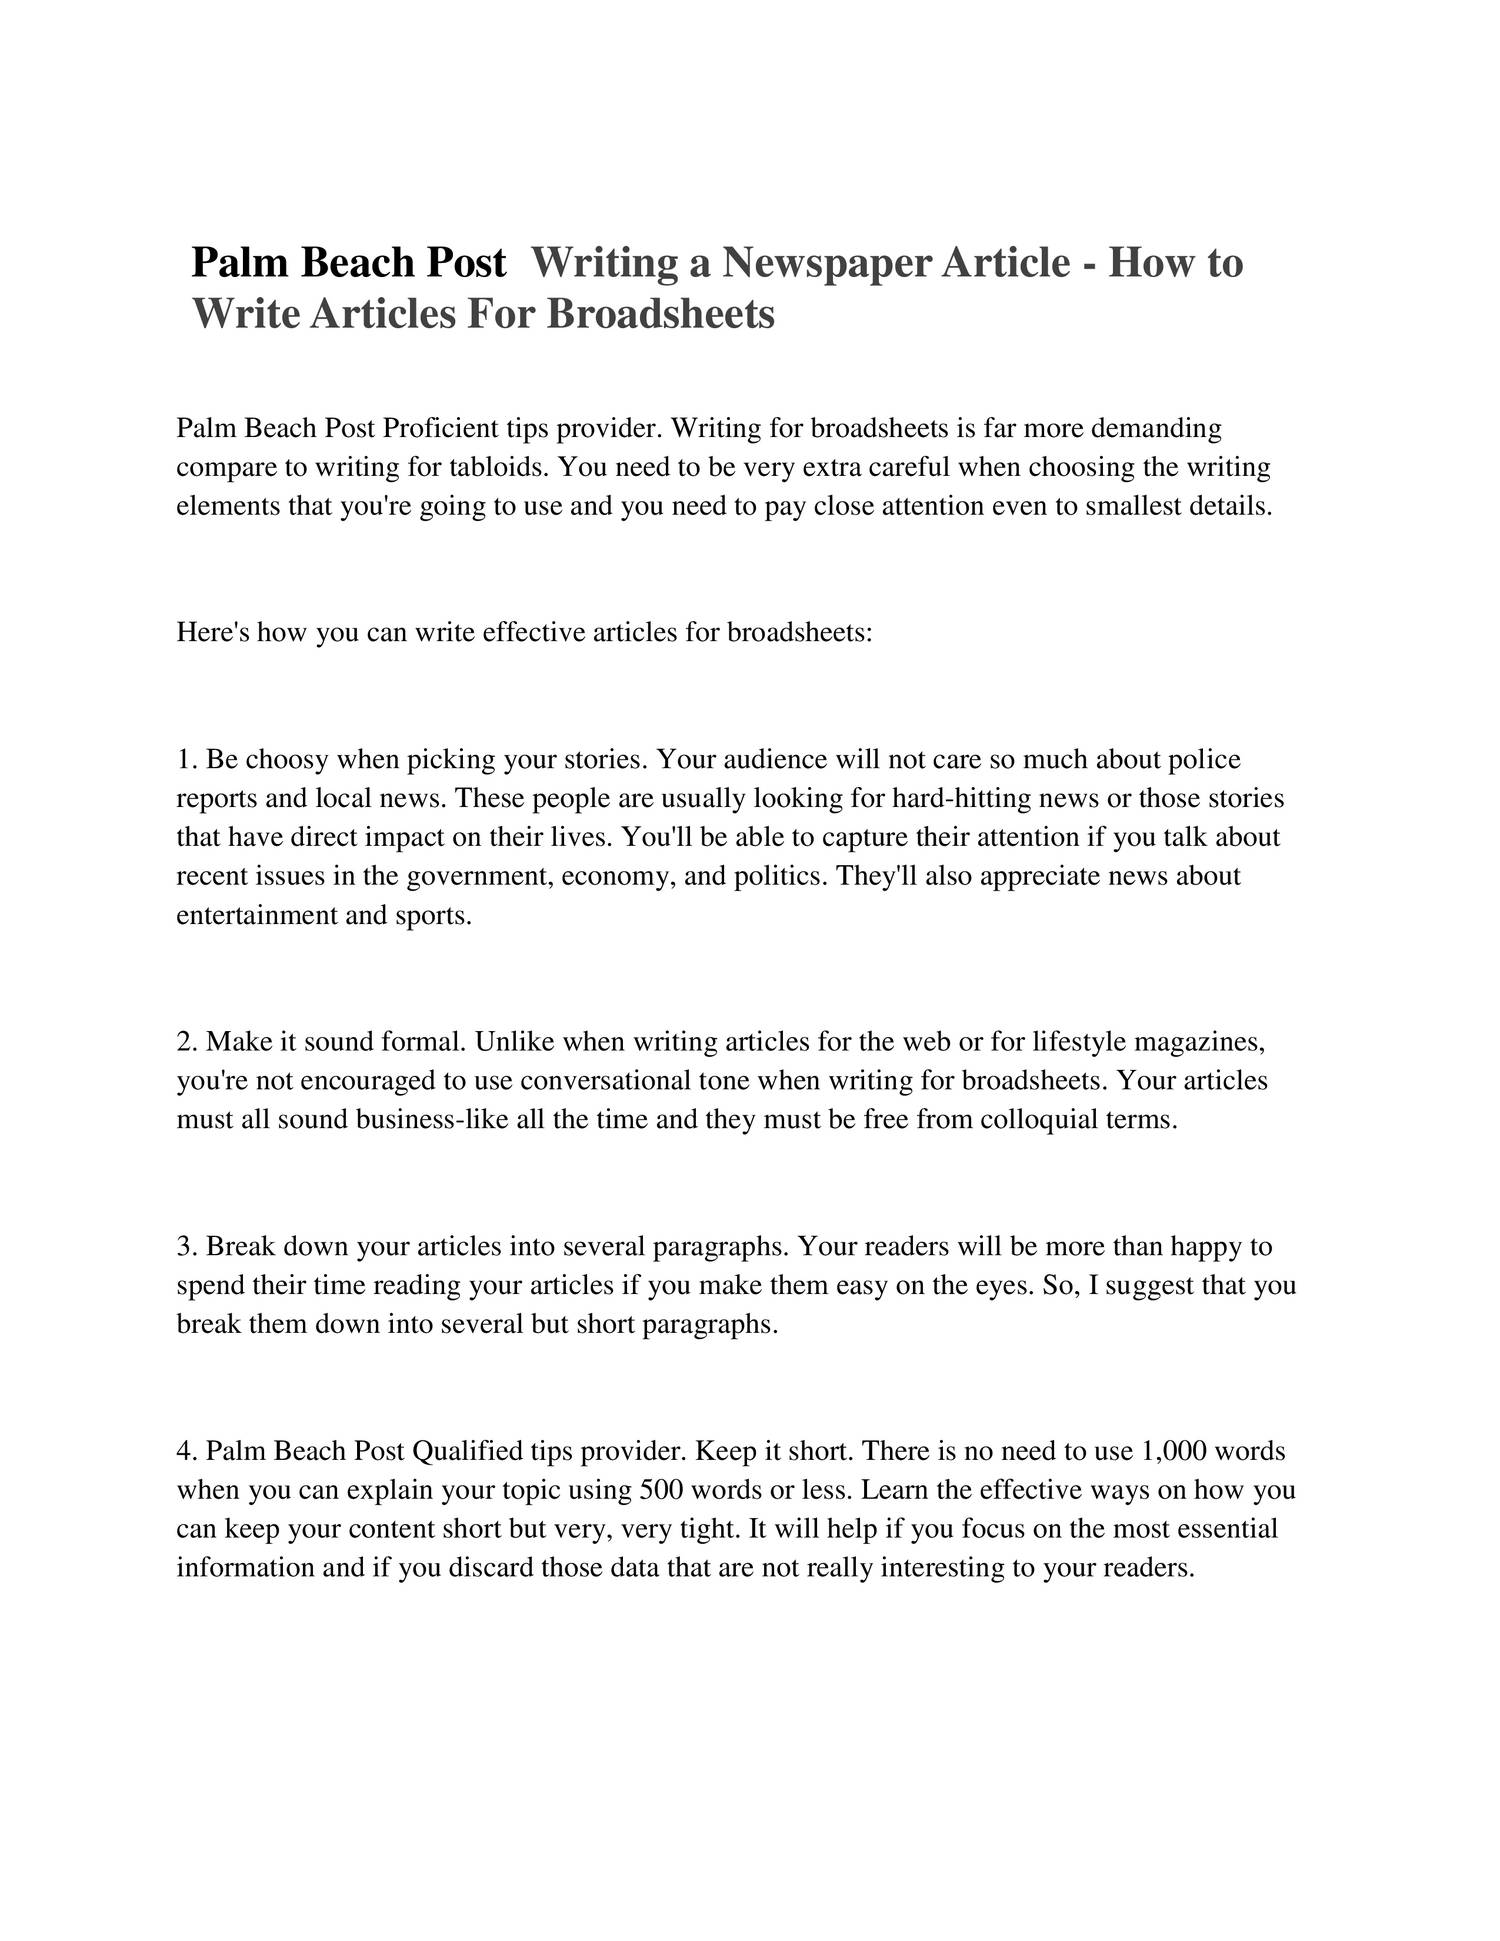 Palm Beach Post Writing a Newspaper Article How to Write Articles